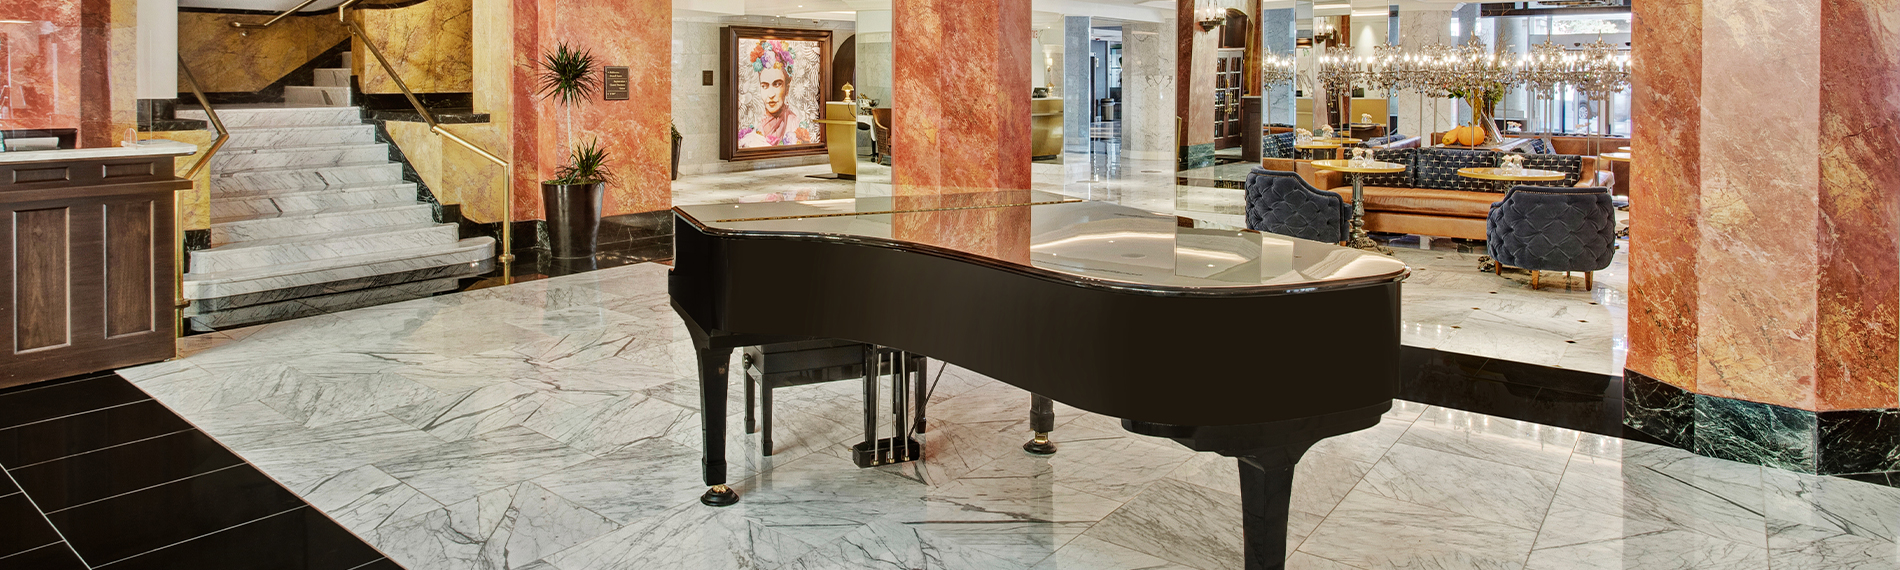 baby grand piano in the hotel lobby